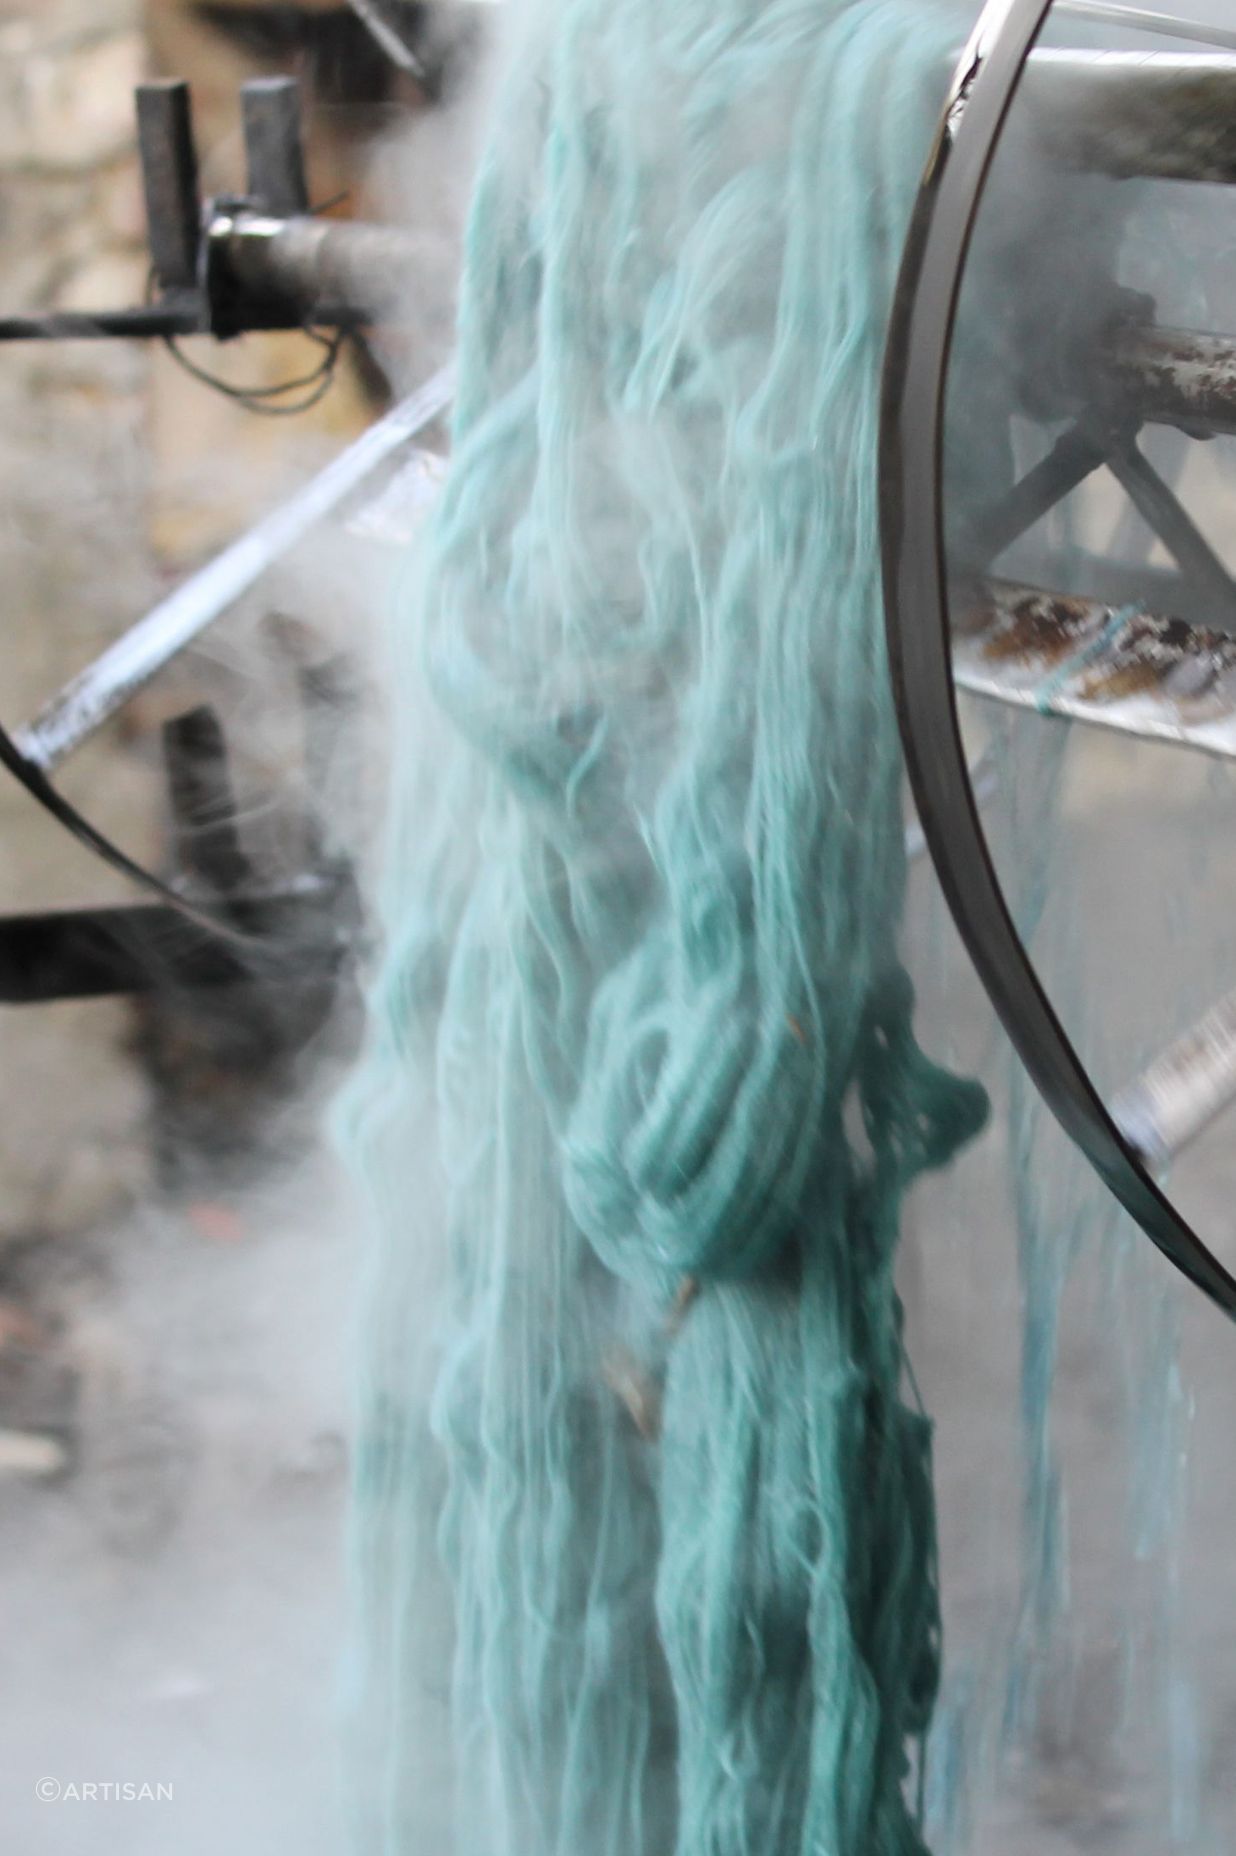 The yarn spinning, carding and washing processes employ a large industry of cottage-based artisans, keeping the handmade art form as pure and traditional as possible.